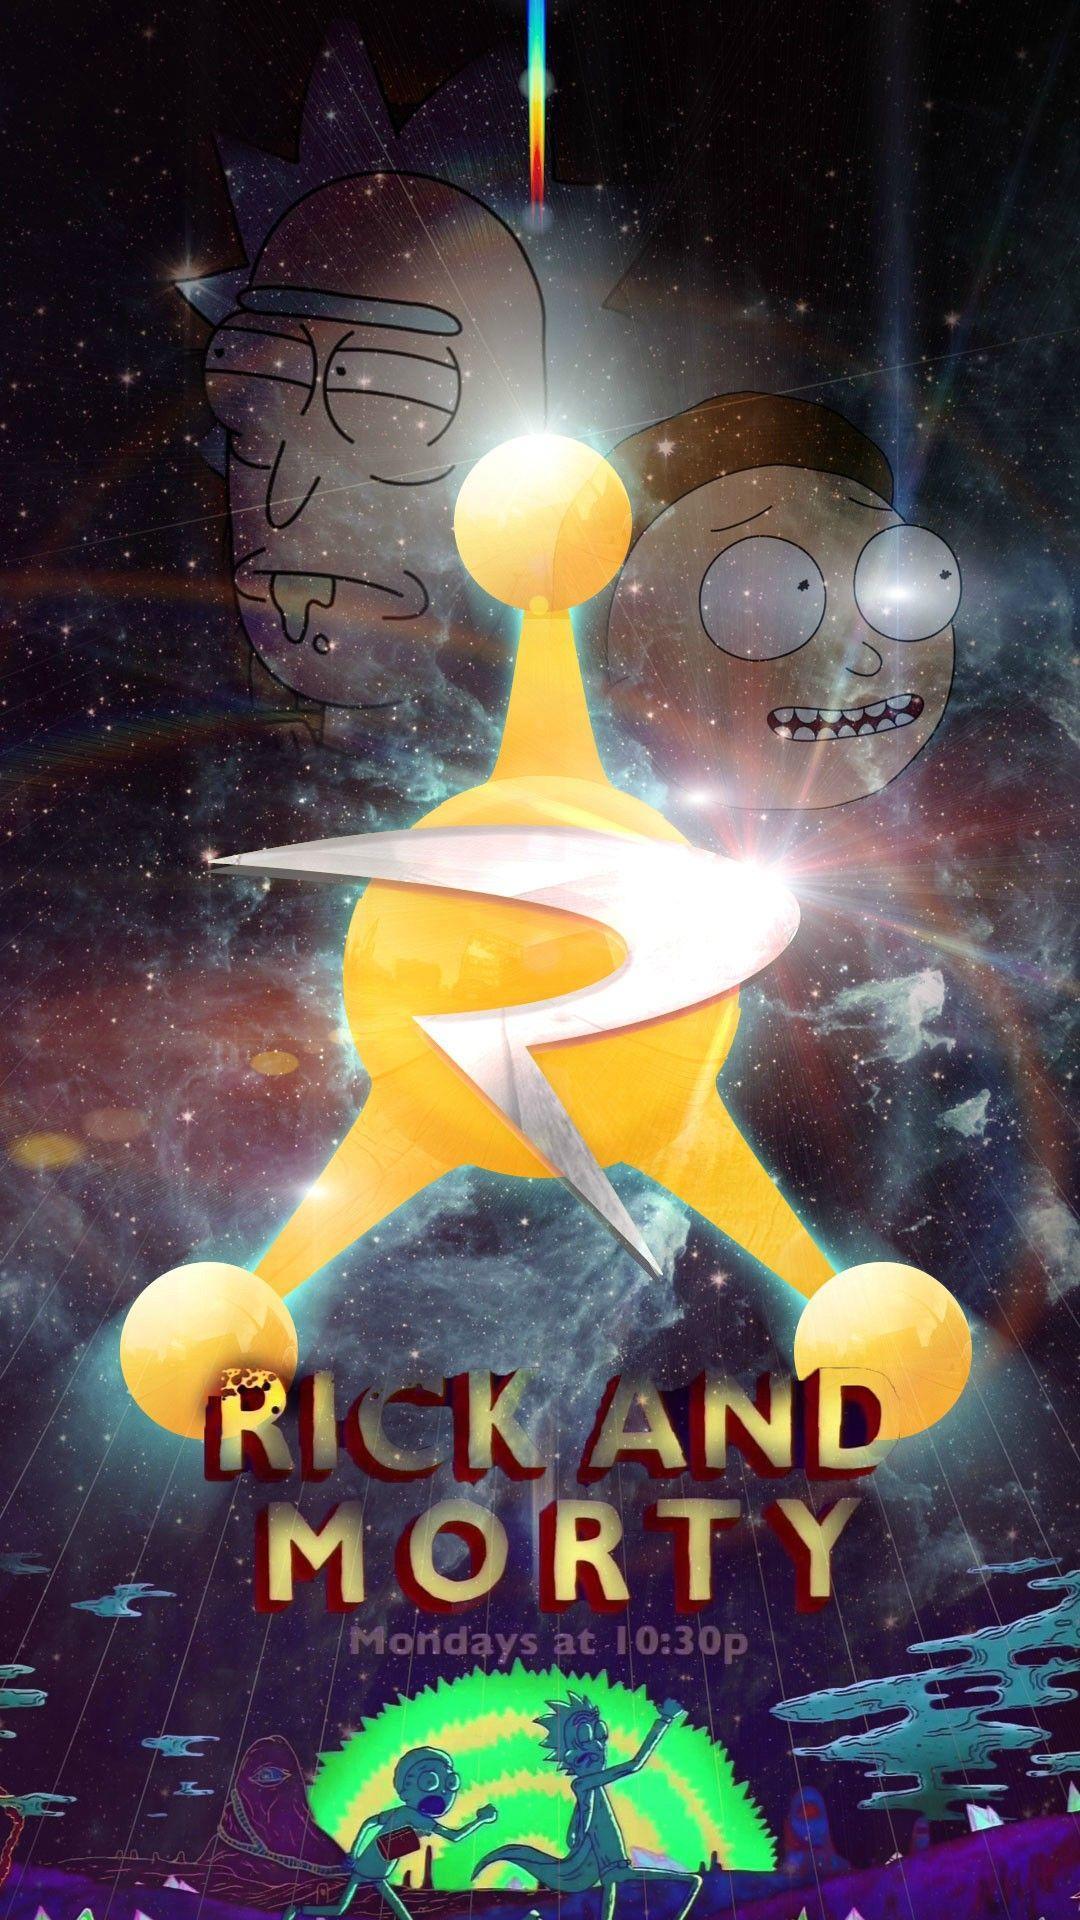 Anybody got any other Rick and Morty phone wallpaper? This is my